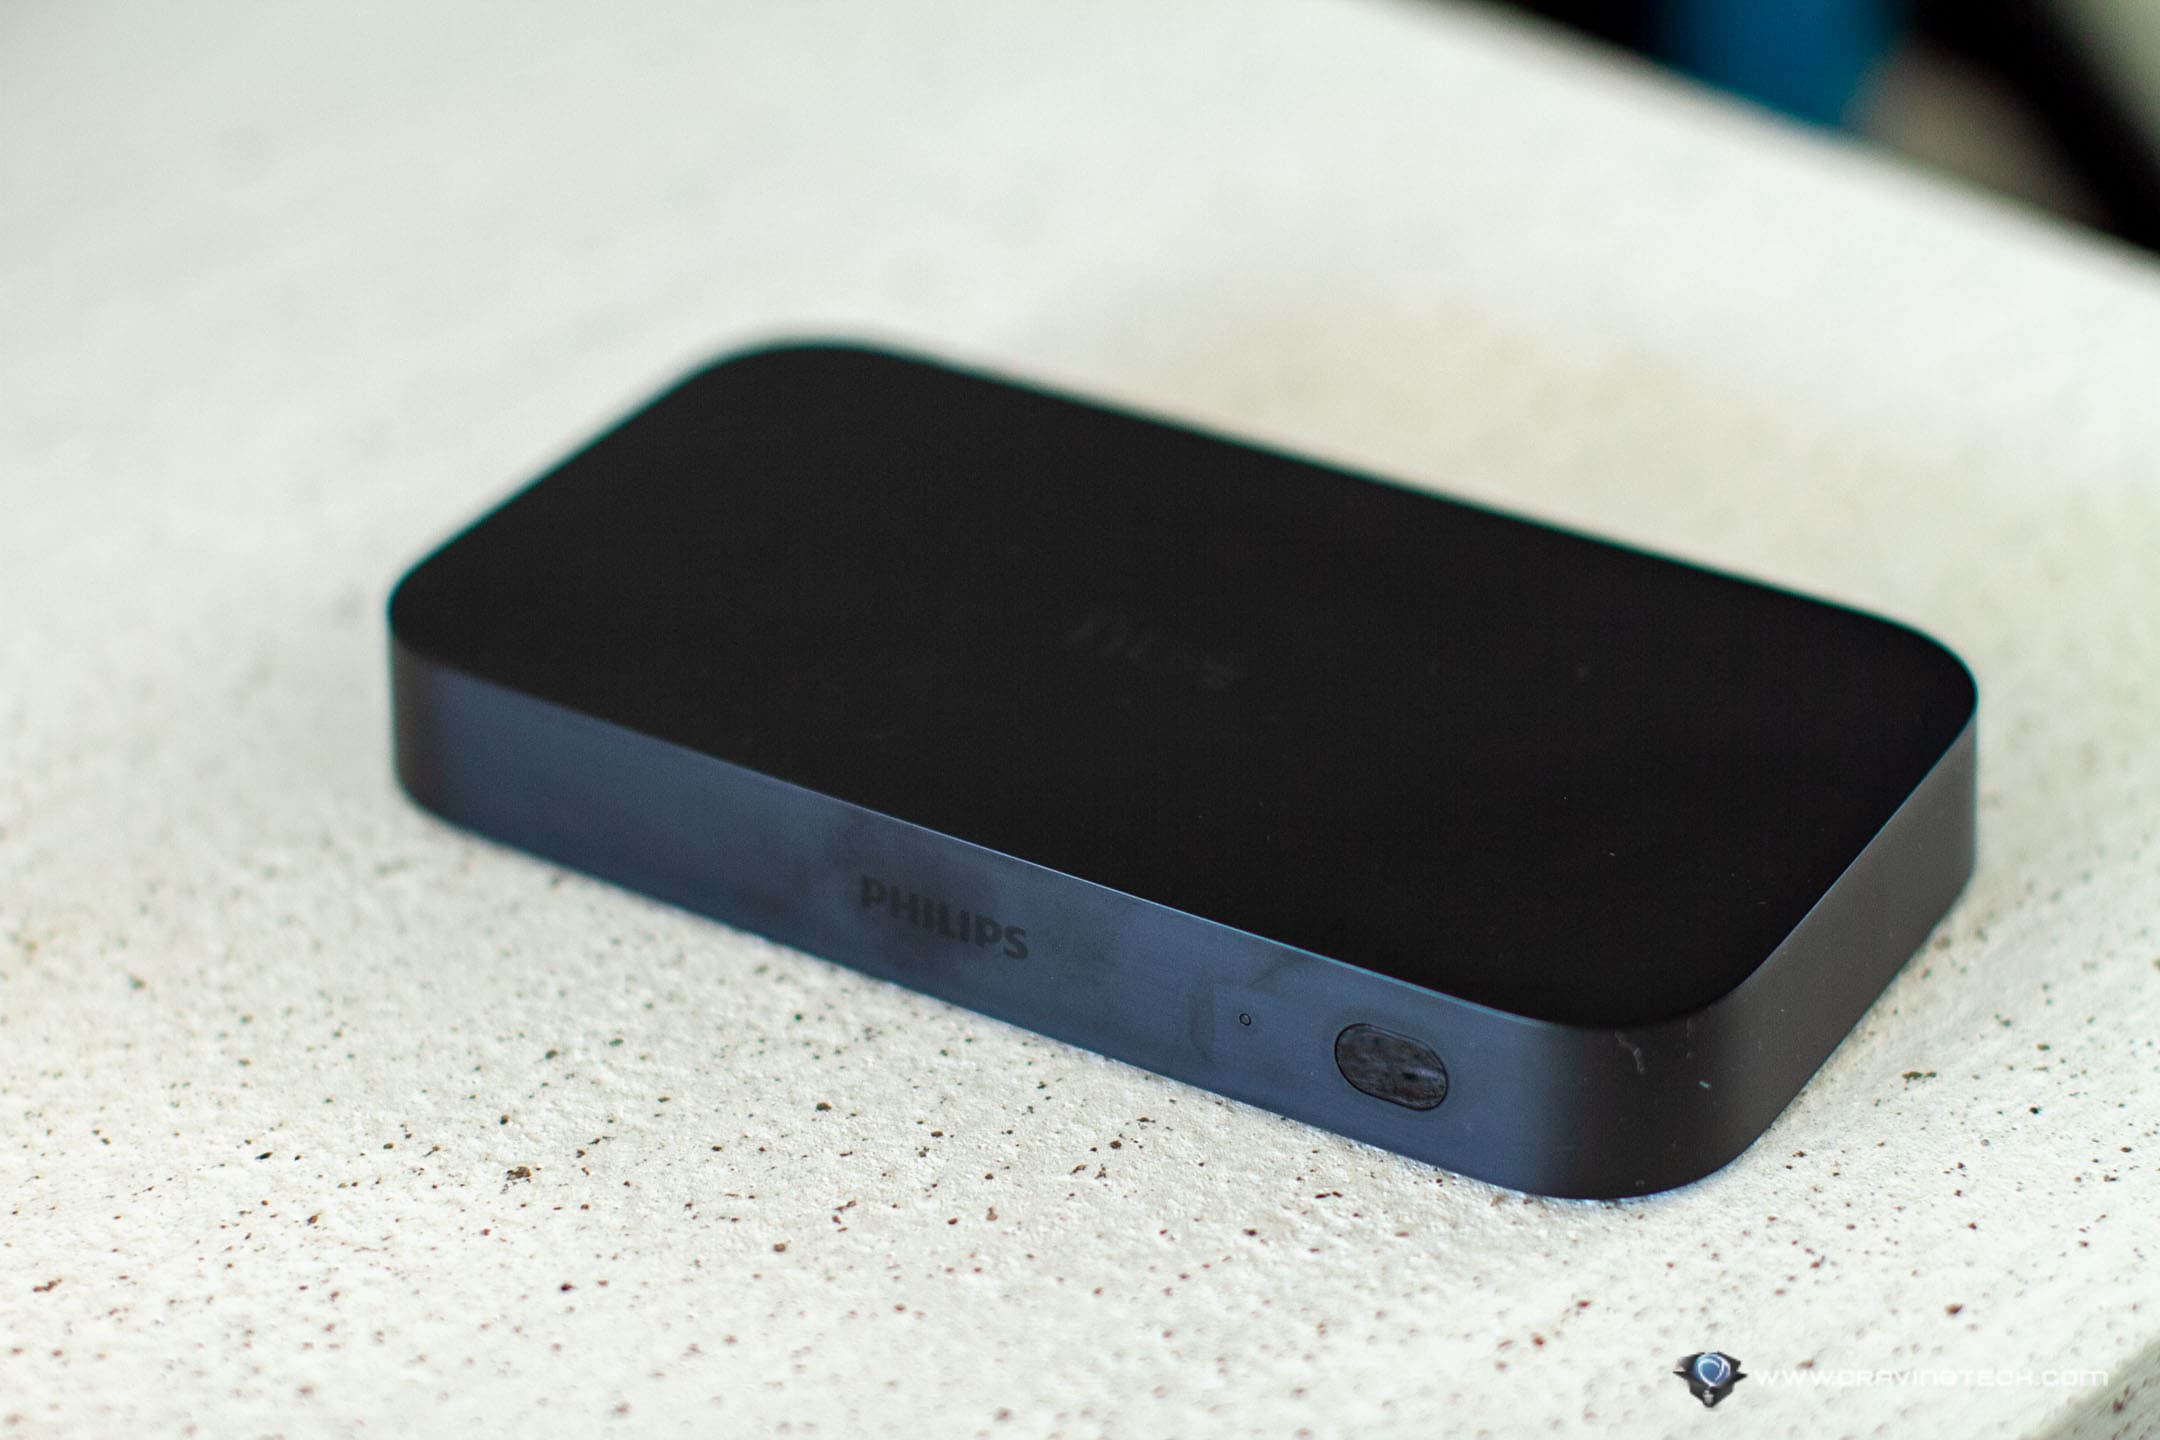 Unboxing: what to expect from the Philips Hue Play HDMI Sync Box